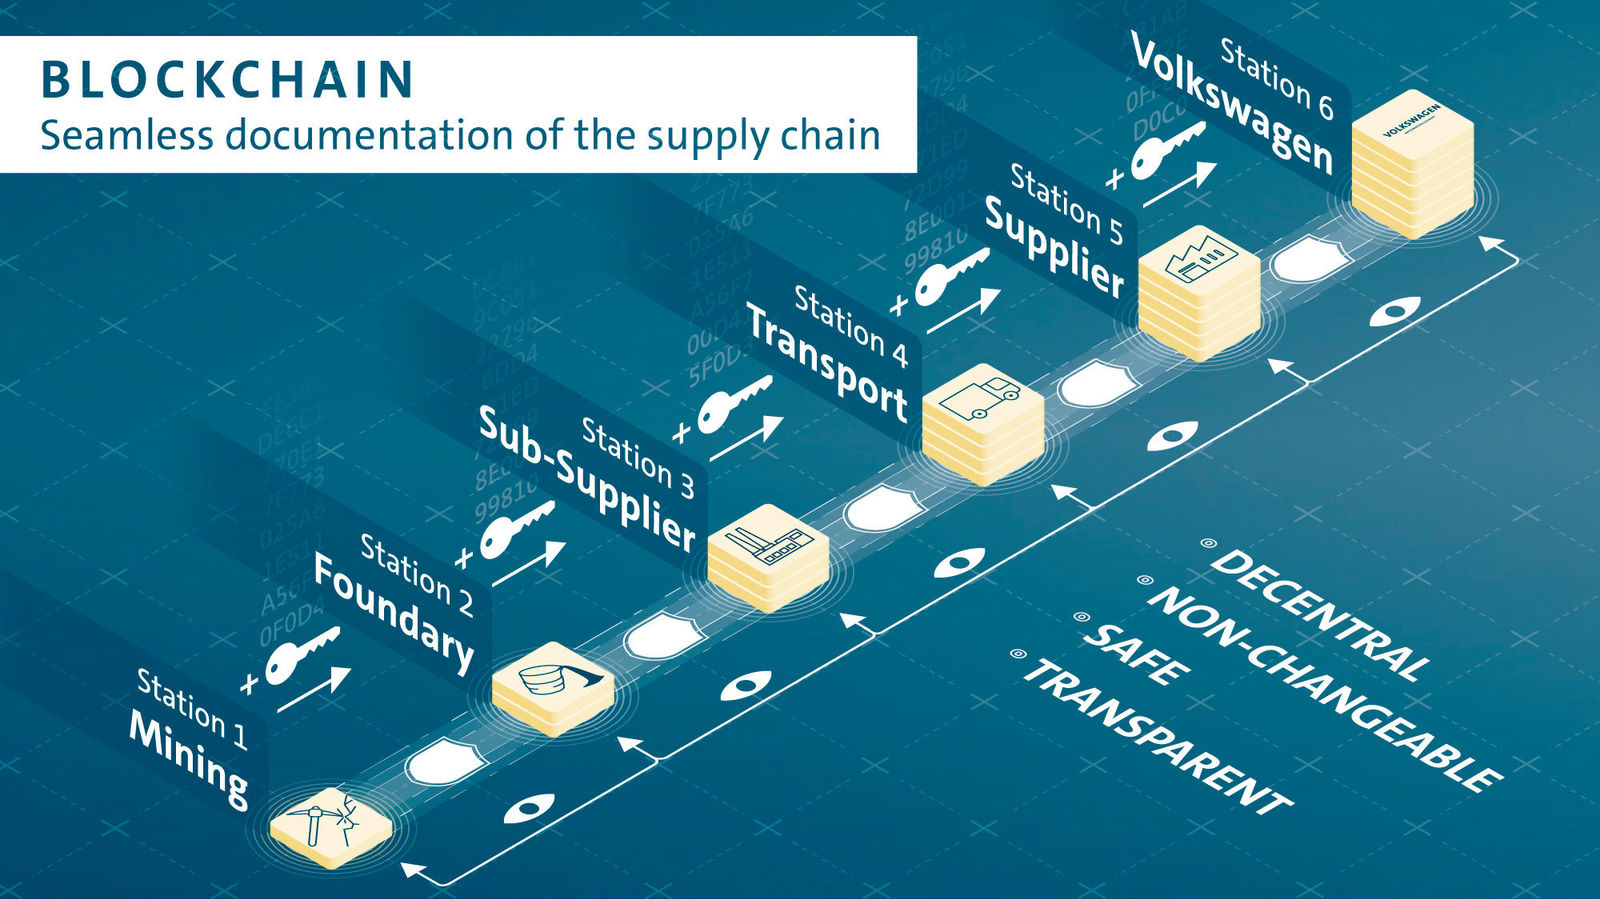 From mine to factory: Volkswagen makes supply chain transparent with blockchain